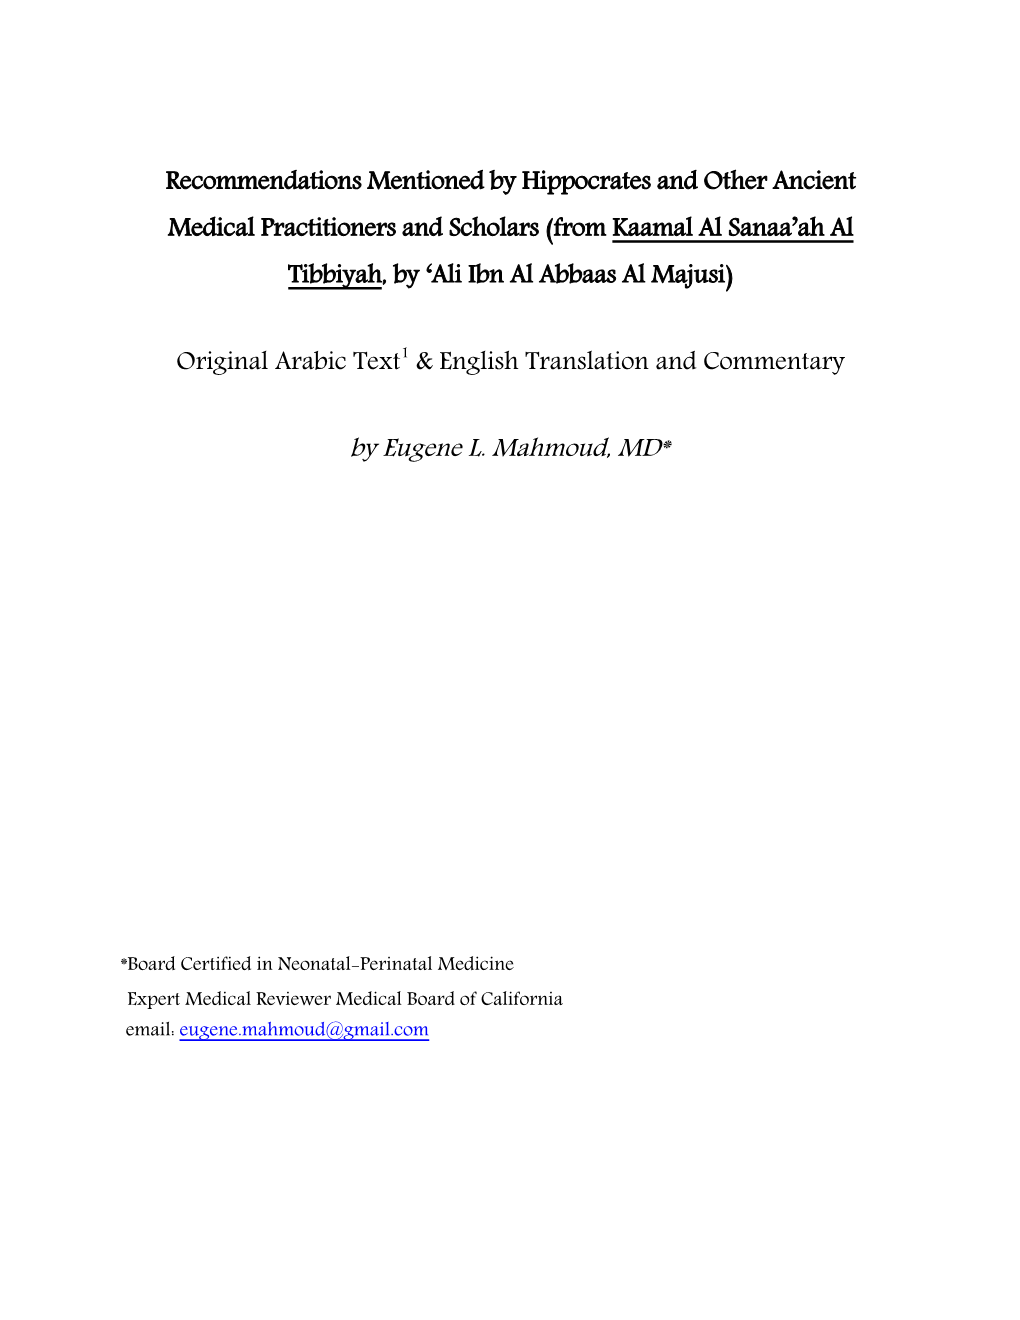 Original Arabic Text1english Translation and Commentary